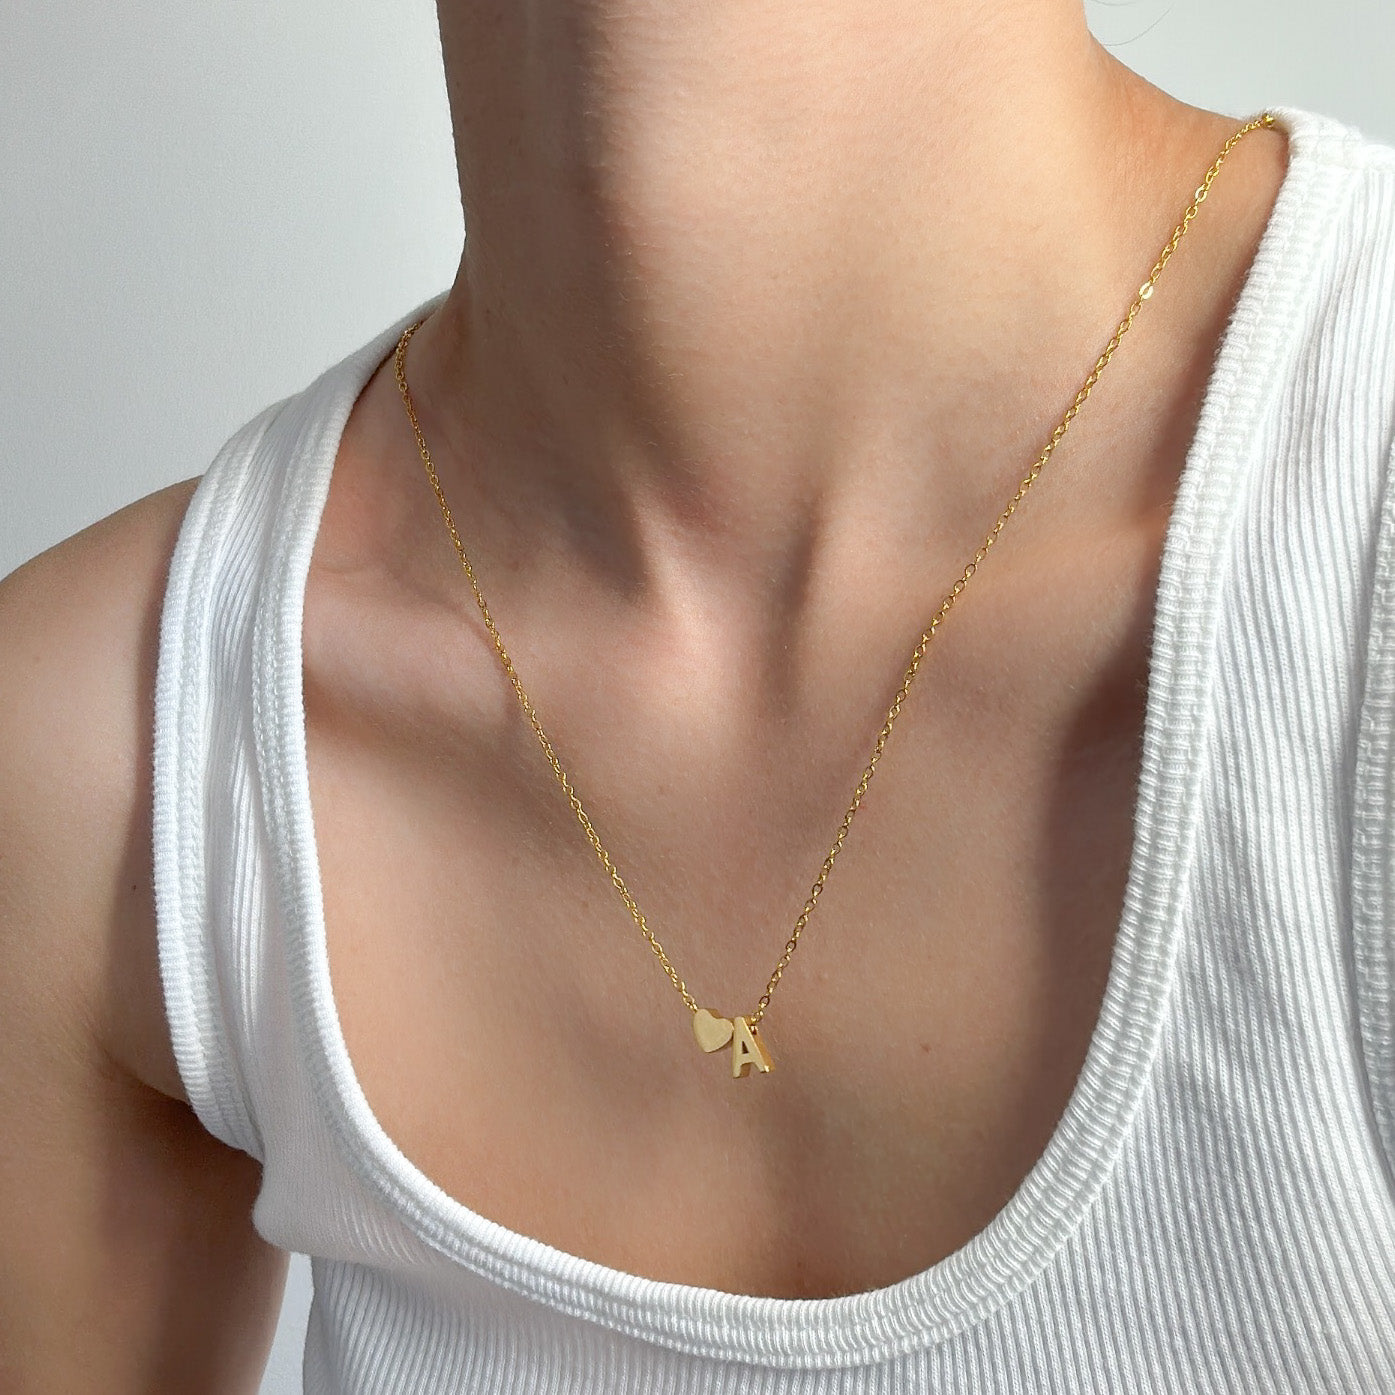 Small connected heart initial necklace – CYC Jewelry